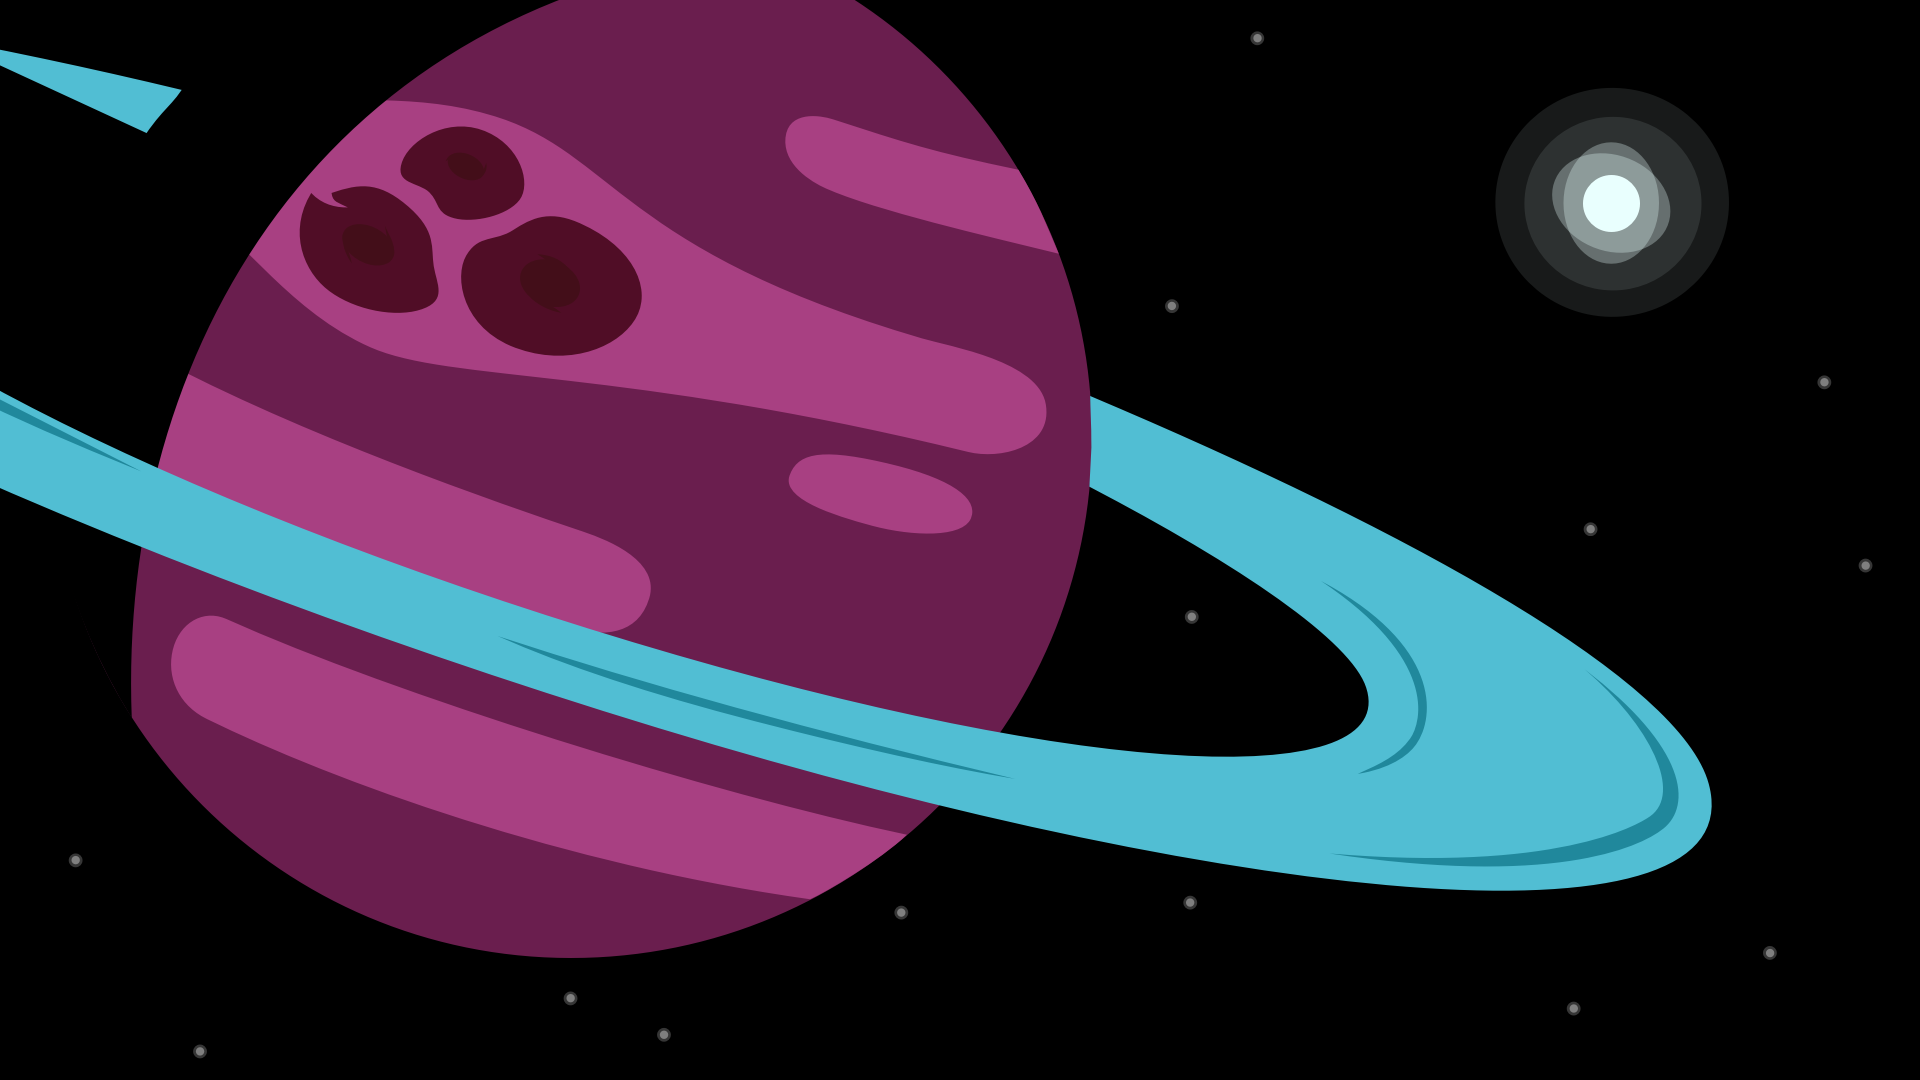 Purple and pink clouds swirl about a planet, twisting into a knot of three deep red storms. An icy blue ring encircles the planet reflecting light from a bright star in the distance.